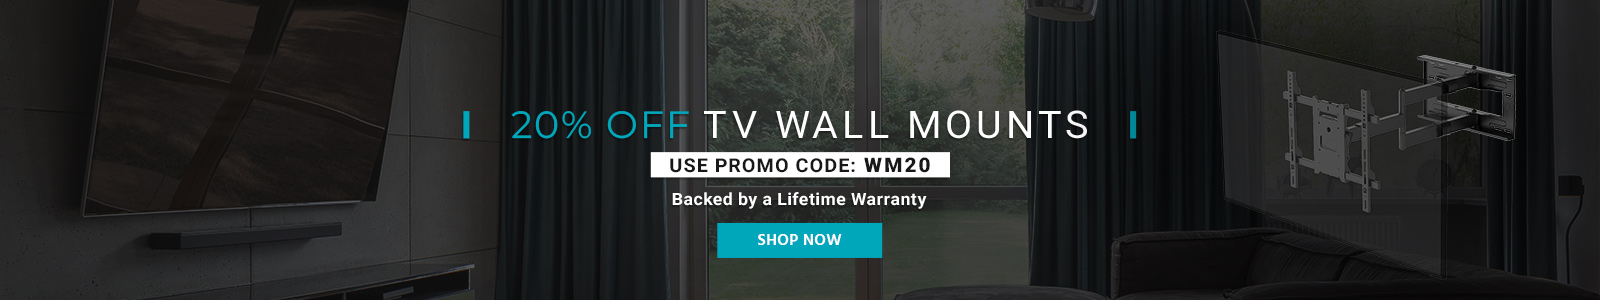 20% off
TV Wall Mounts
use promo code: WM20
Backed by a Lifetime Warranty
Shop Now